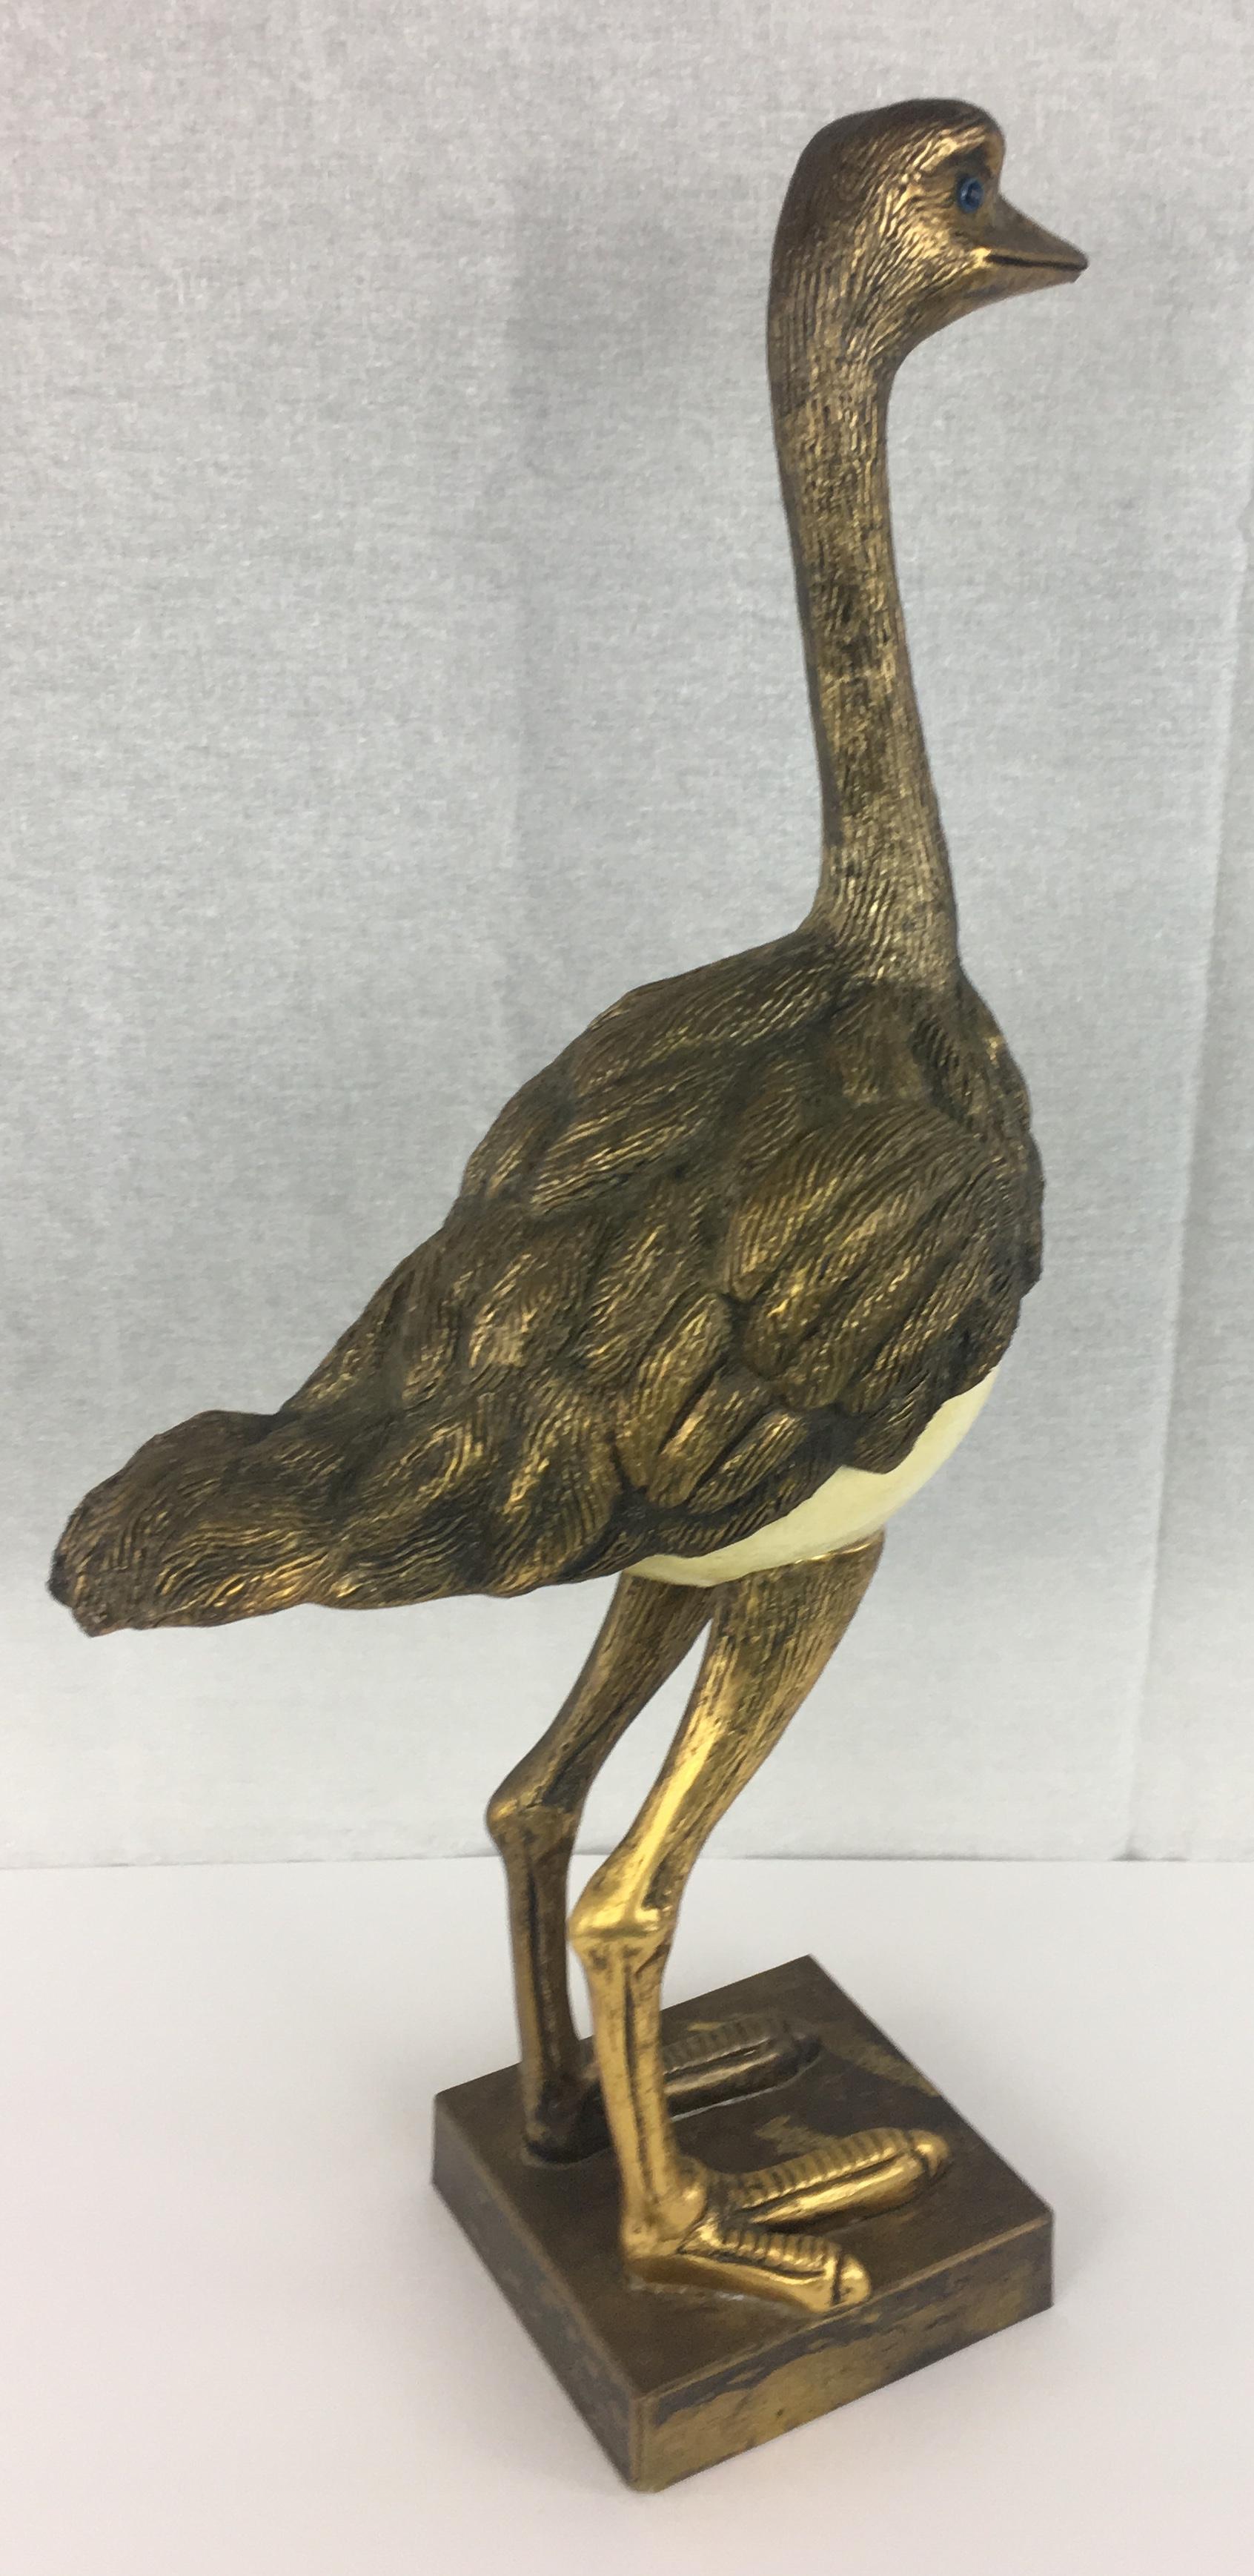 Very decorative mid-century modern sculpture.  Legs, feet, feathered details and head is gold plated metal with glass eyes sculpture resting on a brass base. The details of the sculpted feathers are remarkable.

Designed by Anthony Redmile and